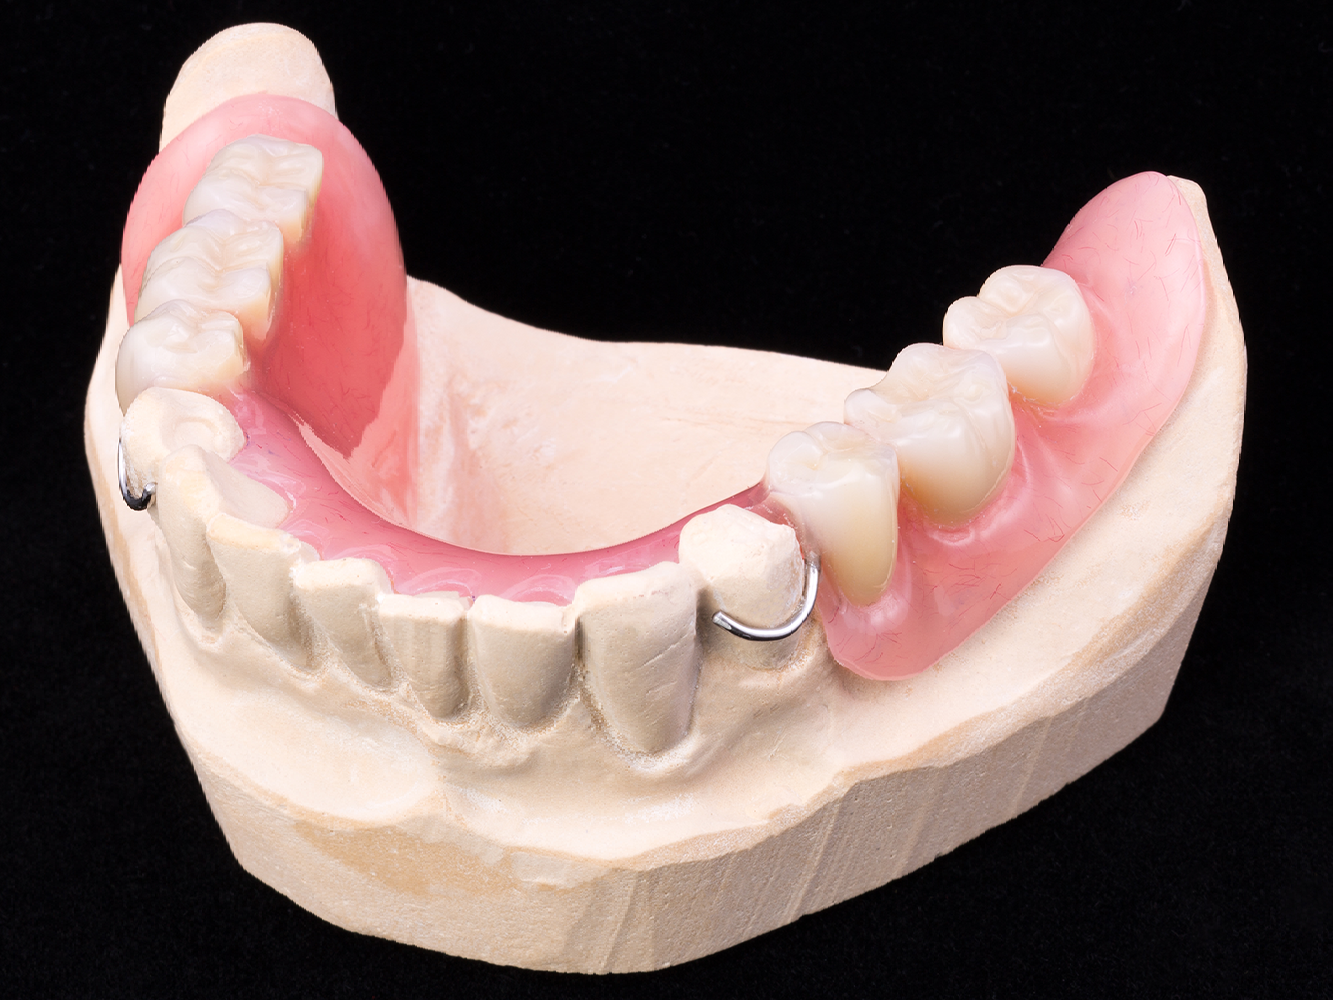 model of acrylic and temporary partials fitted to the model teeth